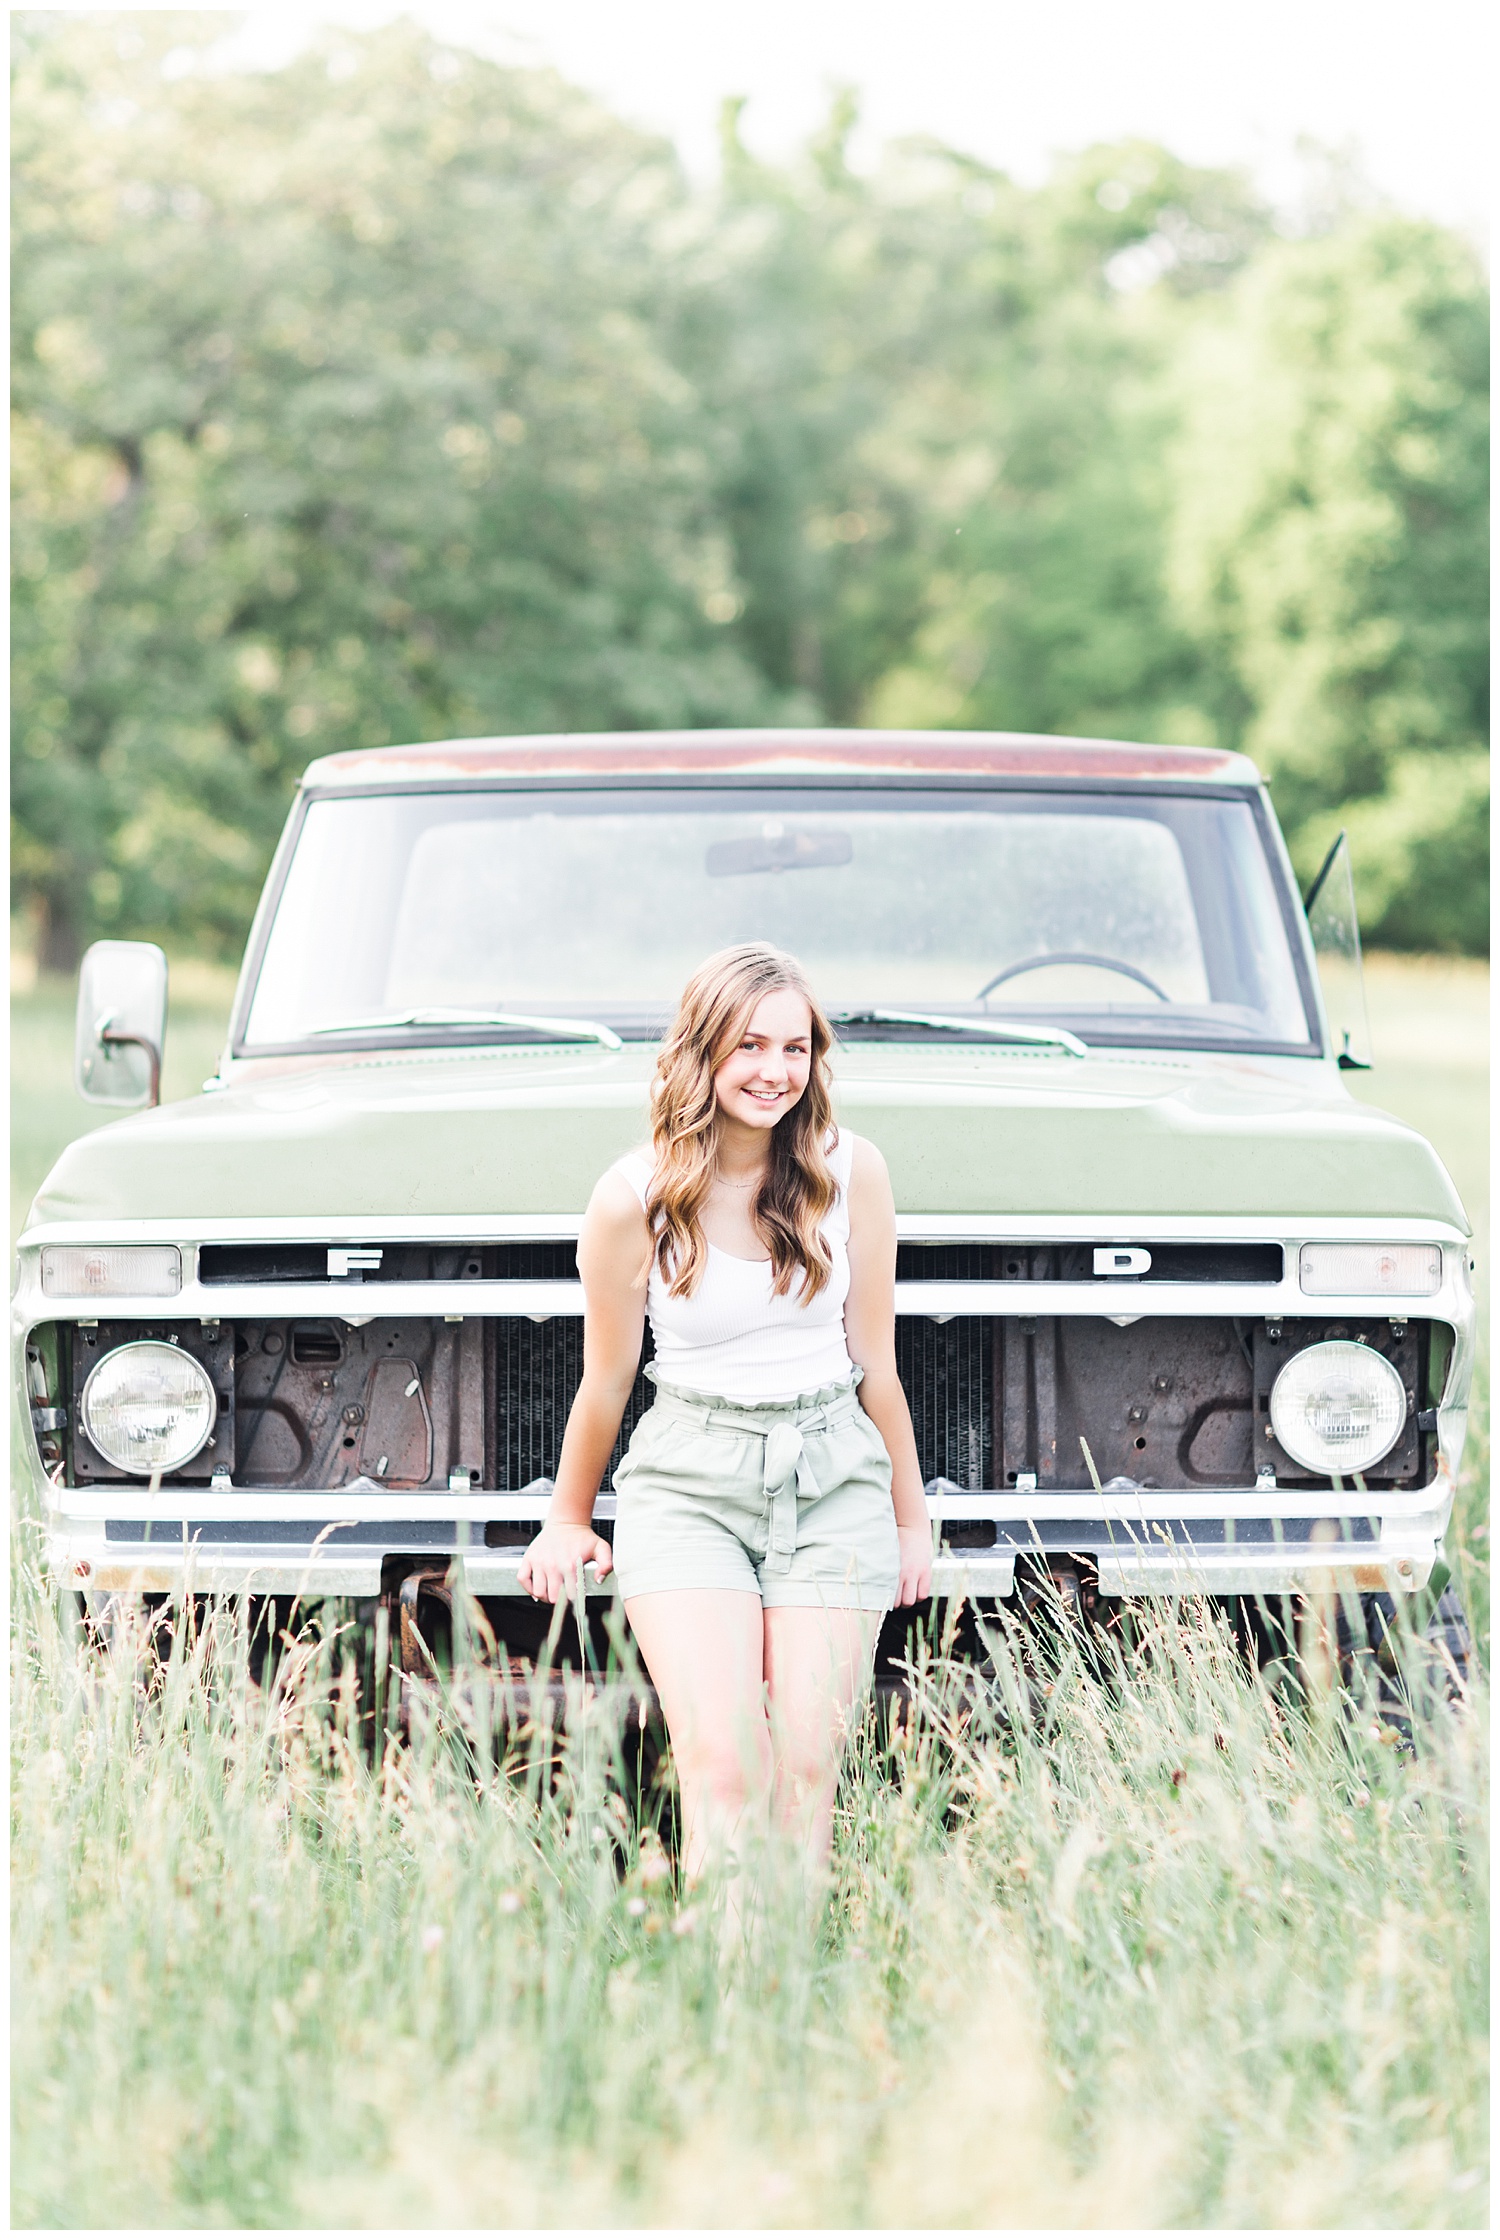 Senior Taylor leaning against an old green Ford truck in a grassy field | CB Studio